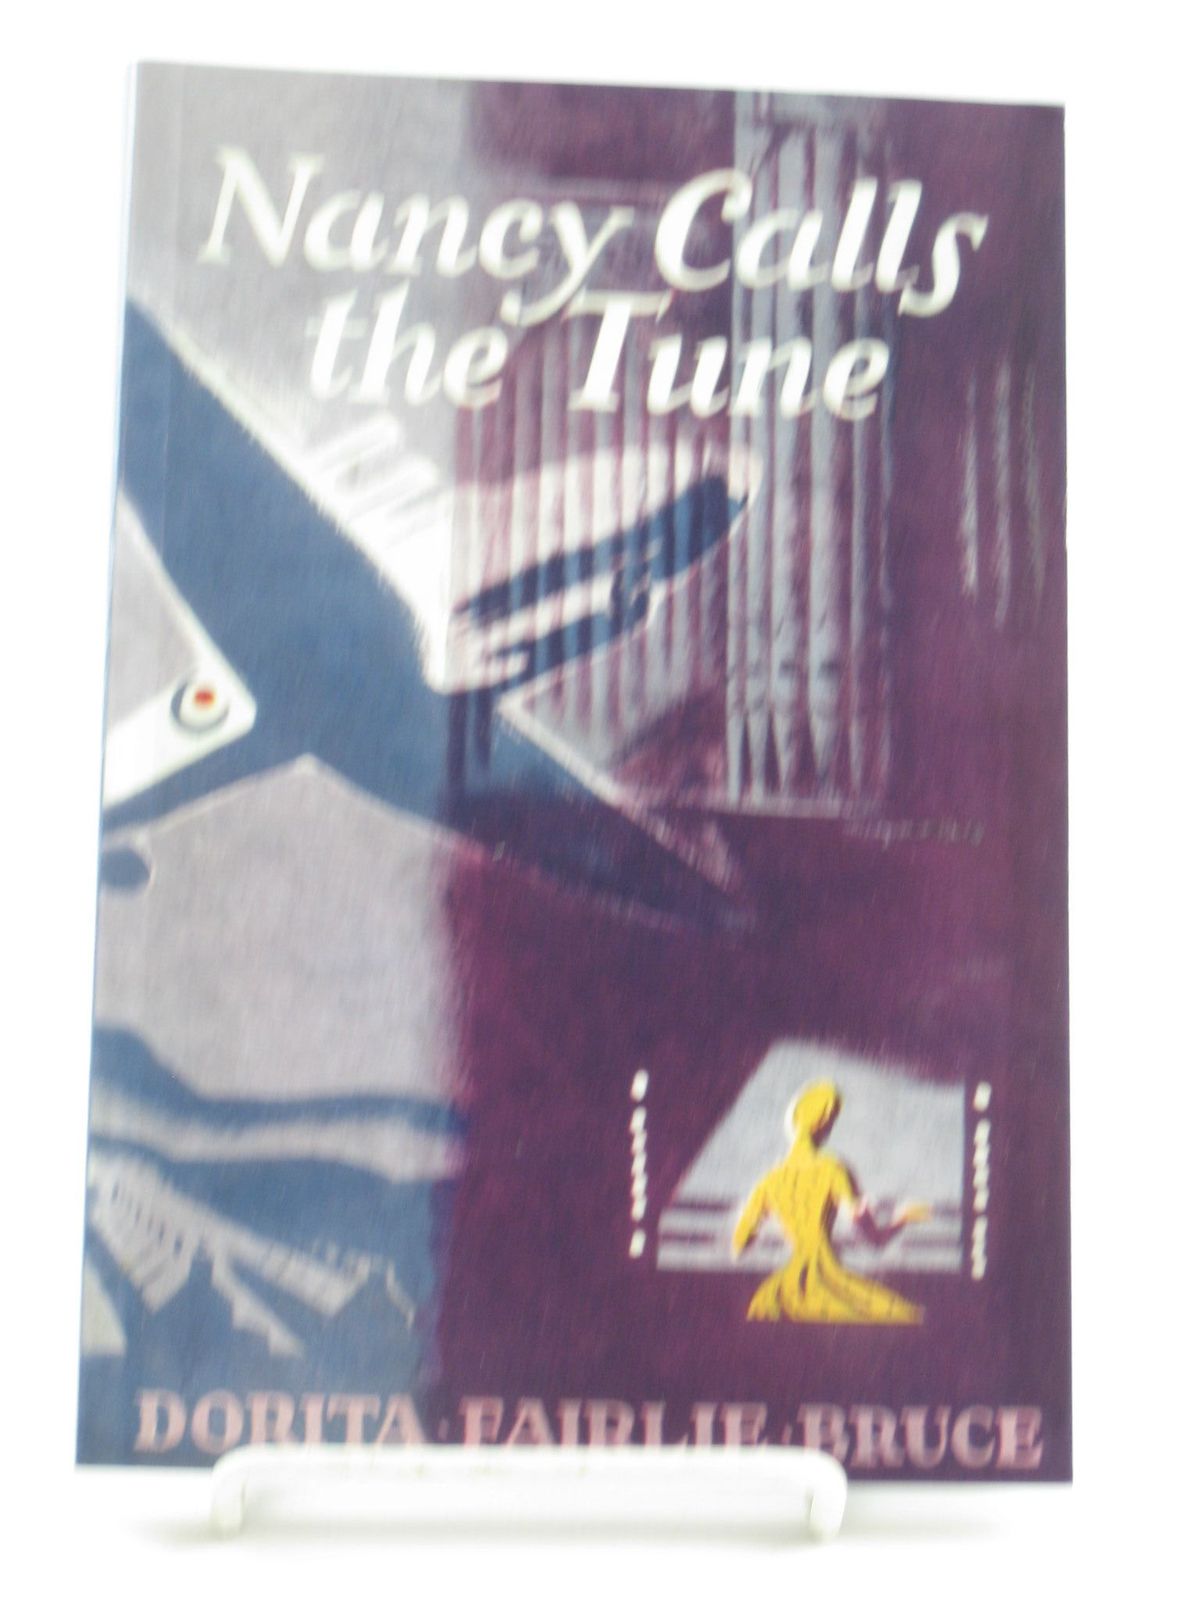 Cover of NANCY CALLS THE TUNE by Dorita Fairlie Bruce